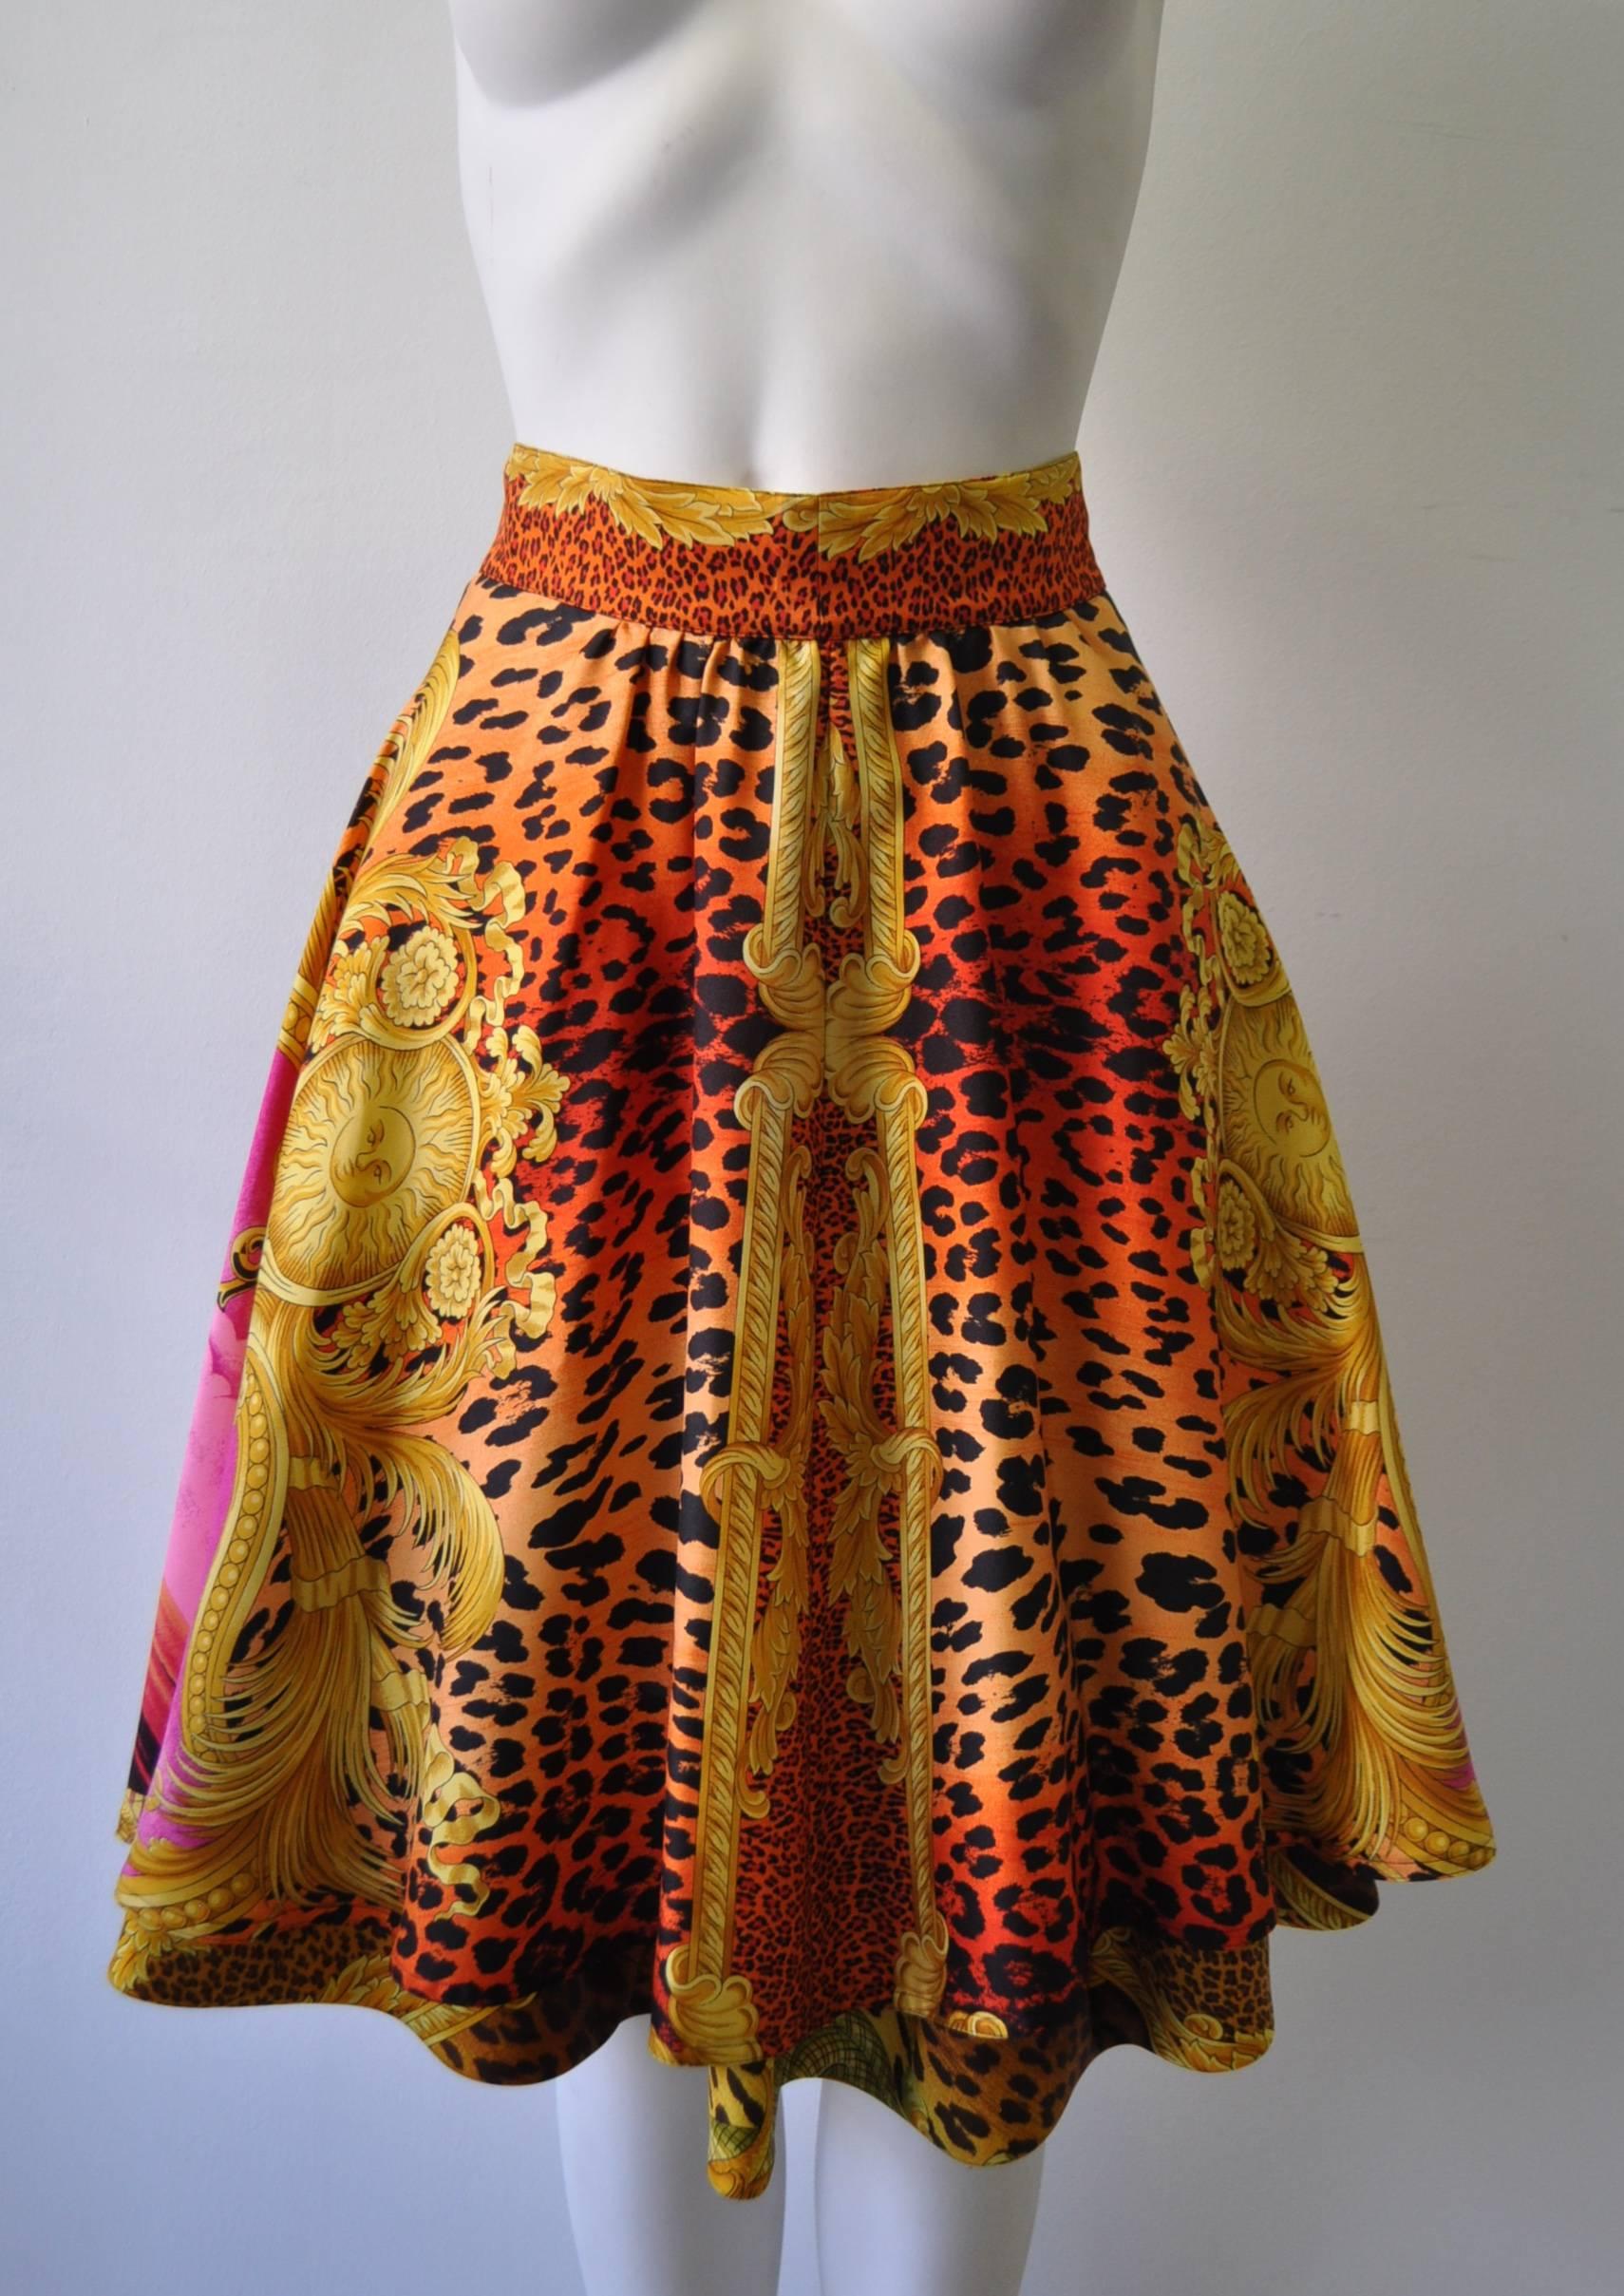 Quintessential Gianni Versace Couture "Miami" Floral and Animal Print Silk Tiered Skirt, Spring 1993 Collection